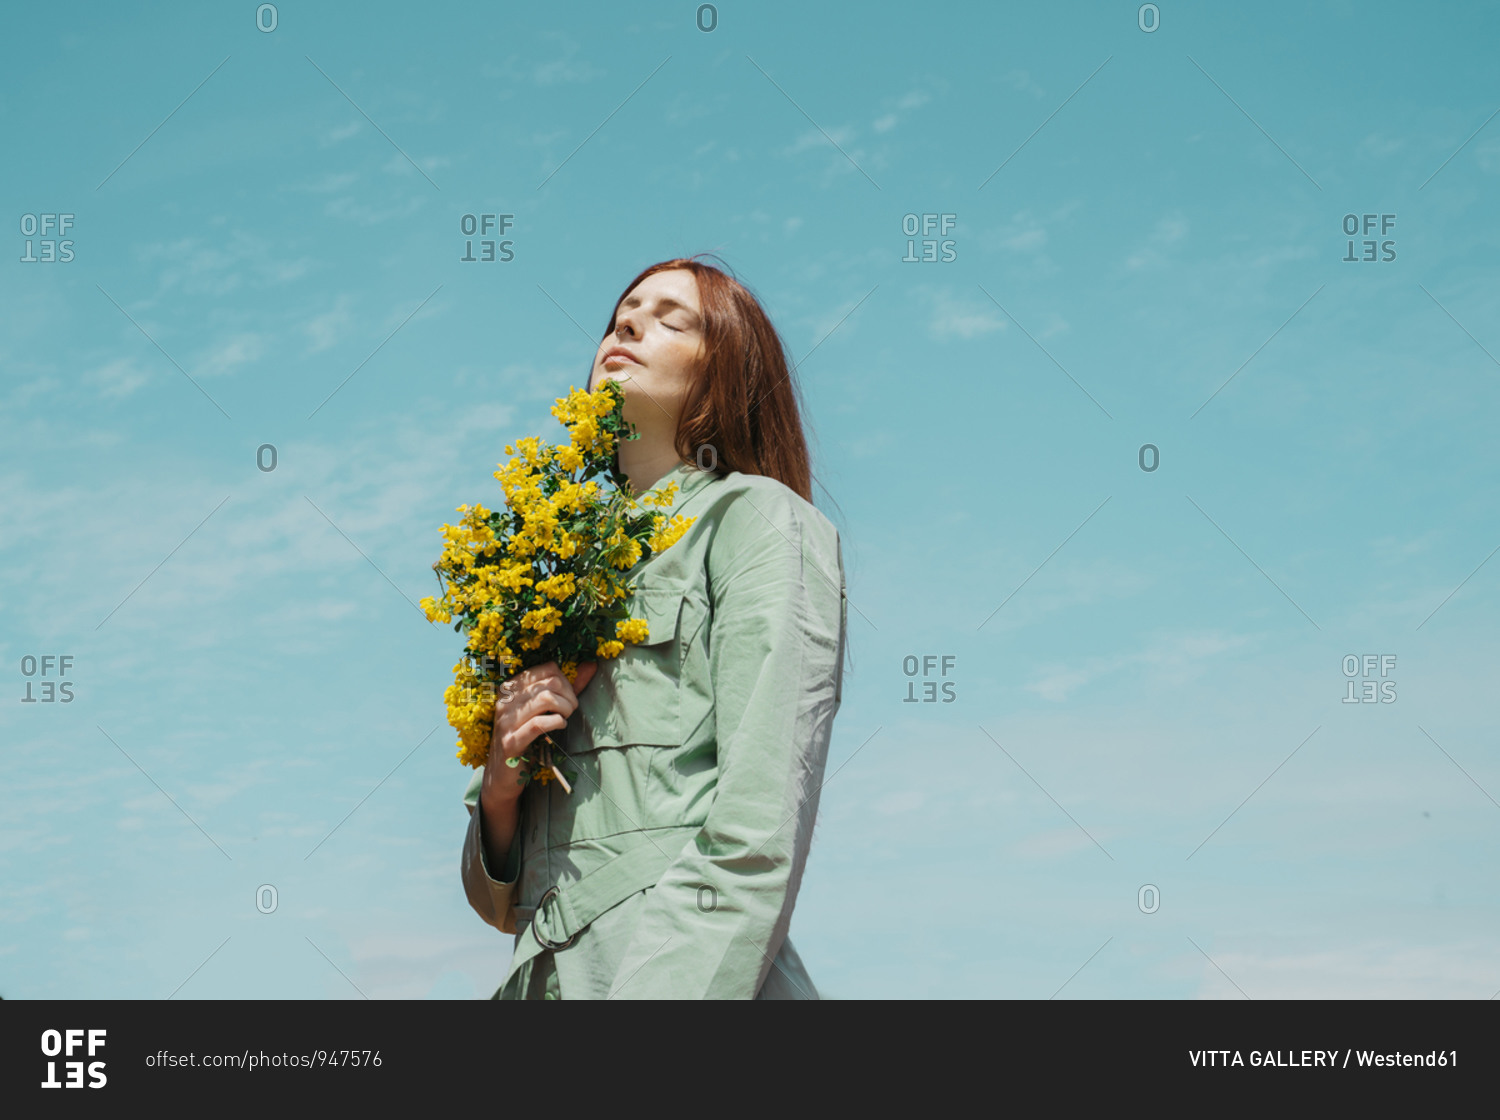 Portrait of redheaded young woman with eyes closed standing against sky holding bunch of yellow flowers